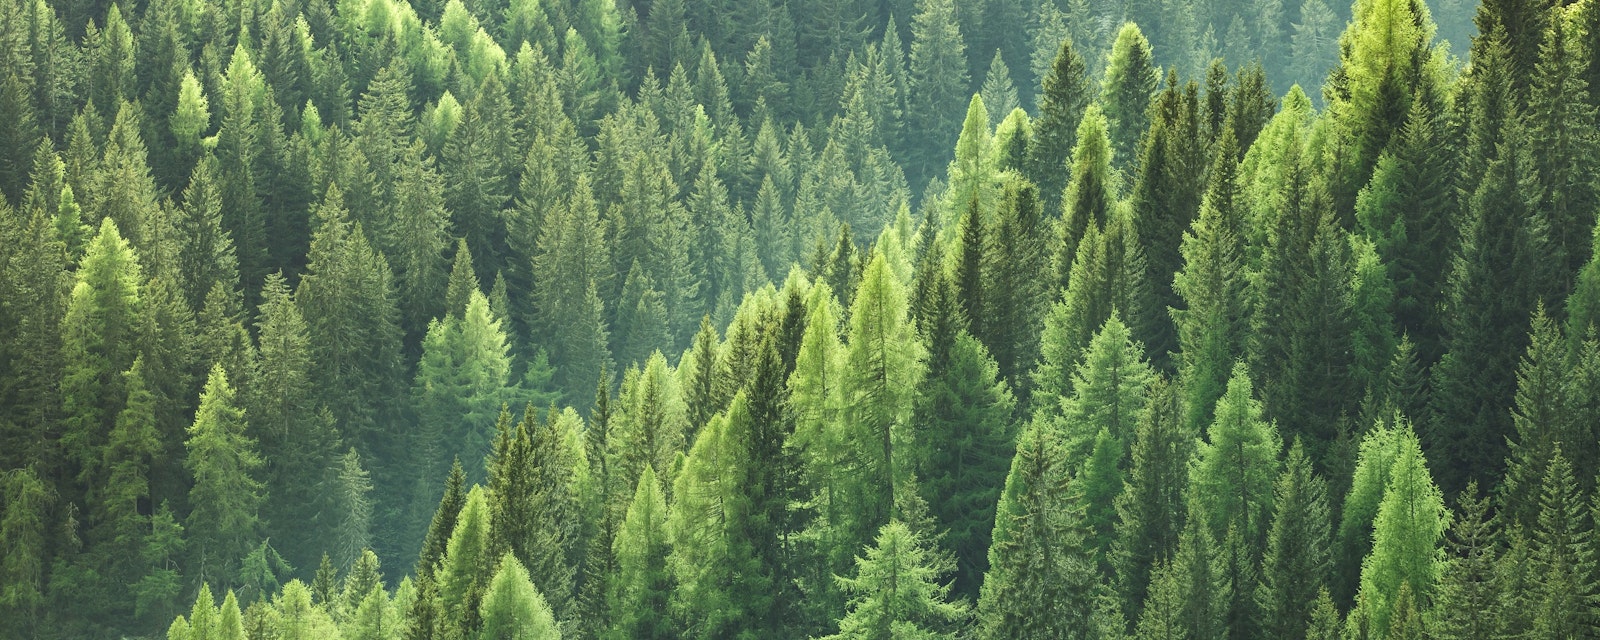 Healthy,Green,Trees,In,A,Forest,Of,Old,Spruce,,Fir